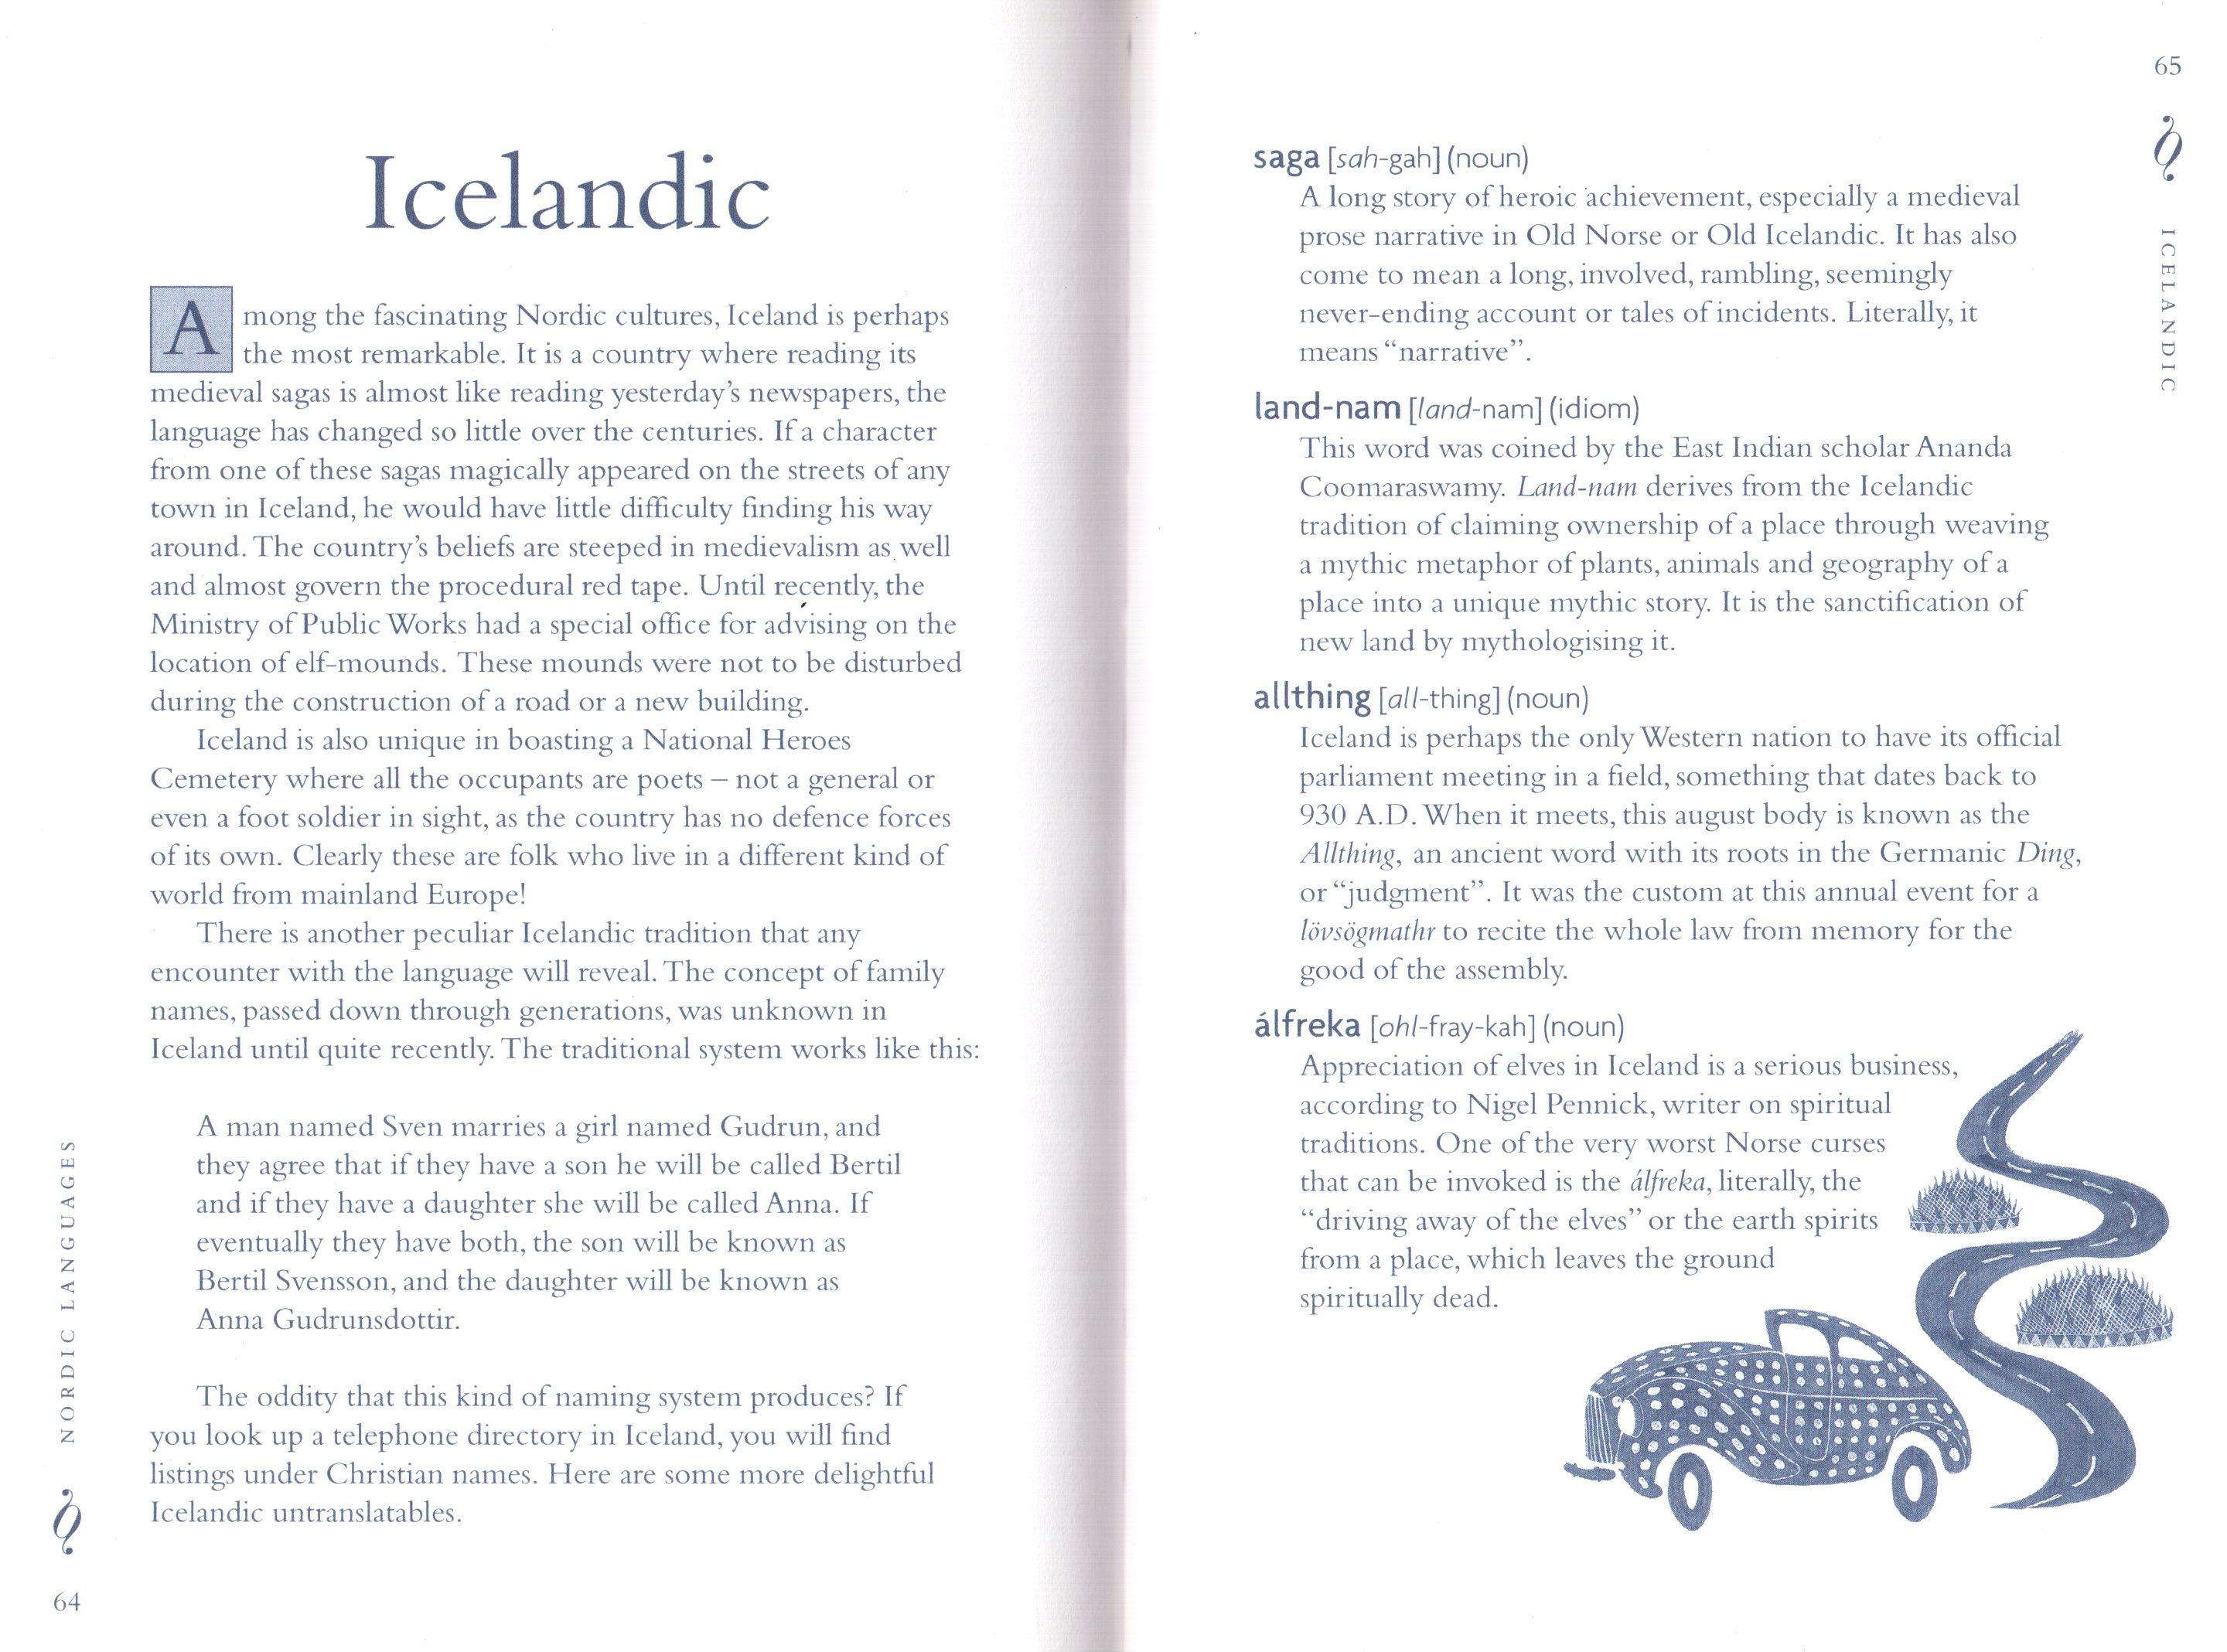 The Untranslatables Iceland